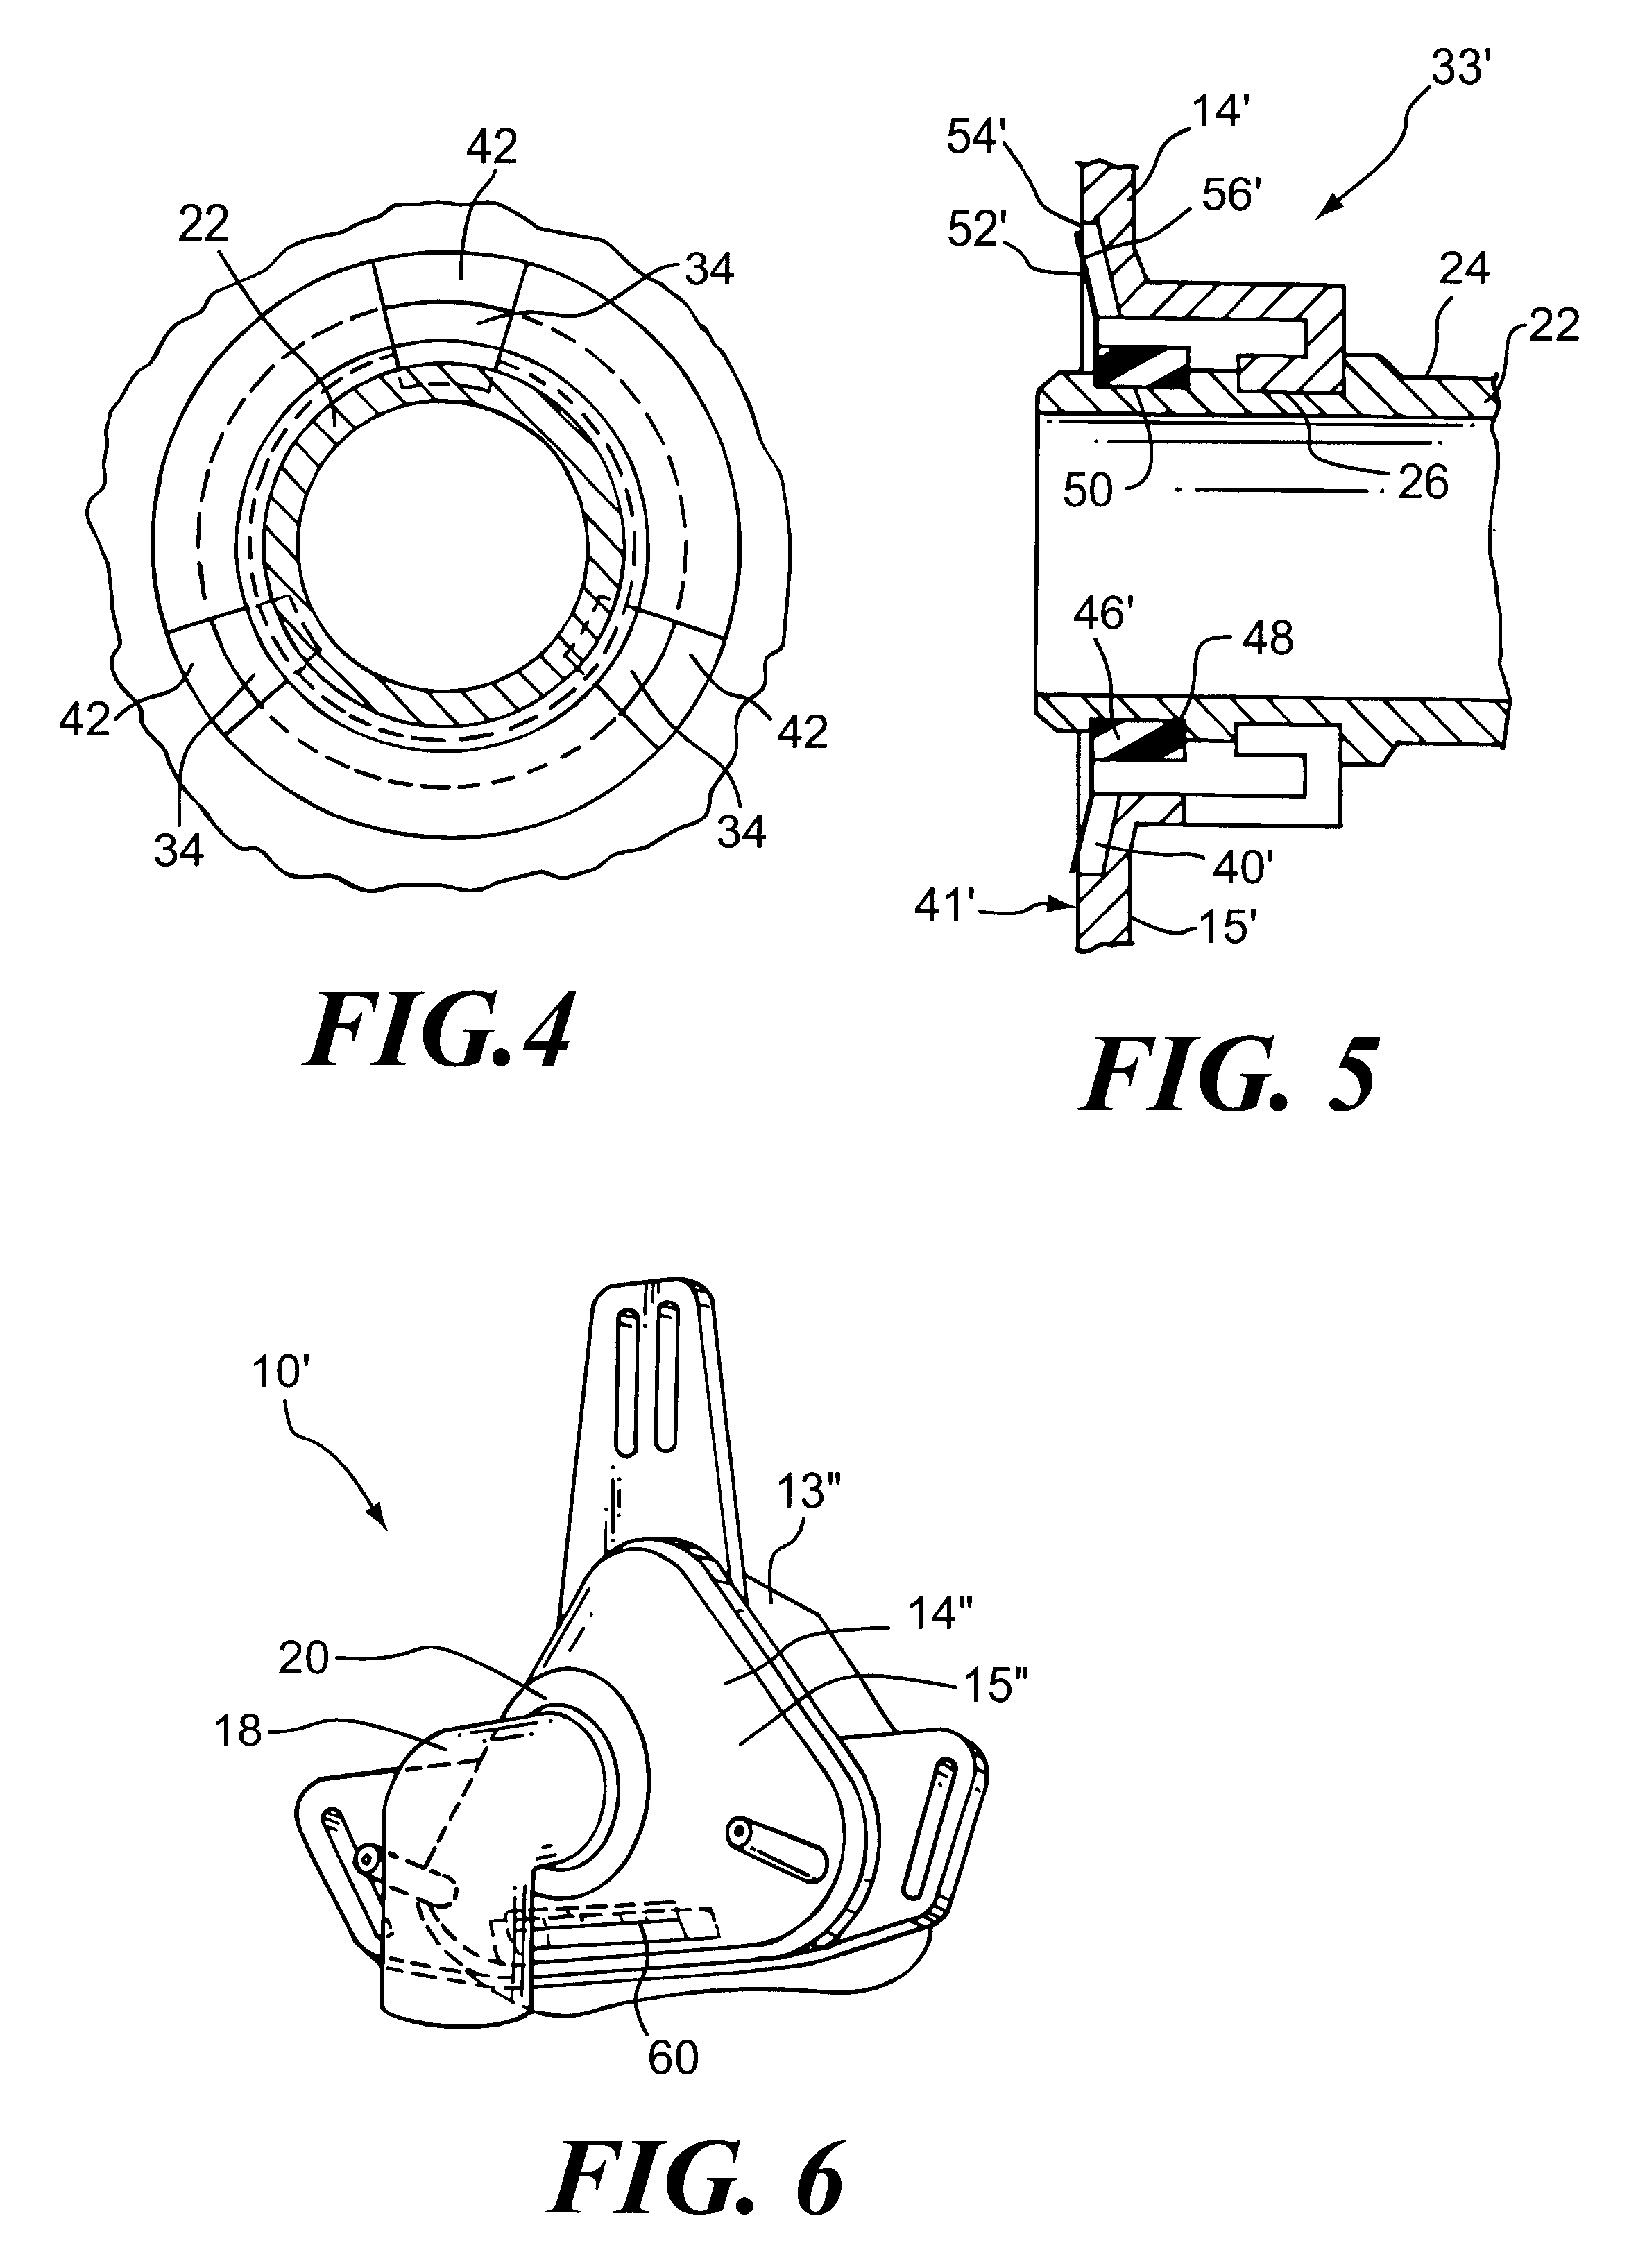 Combined patient interface and exhaust assembly